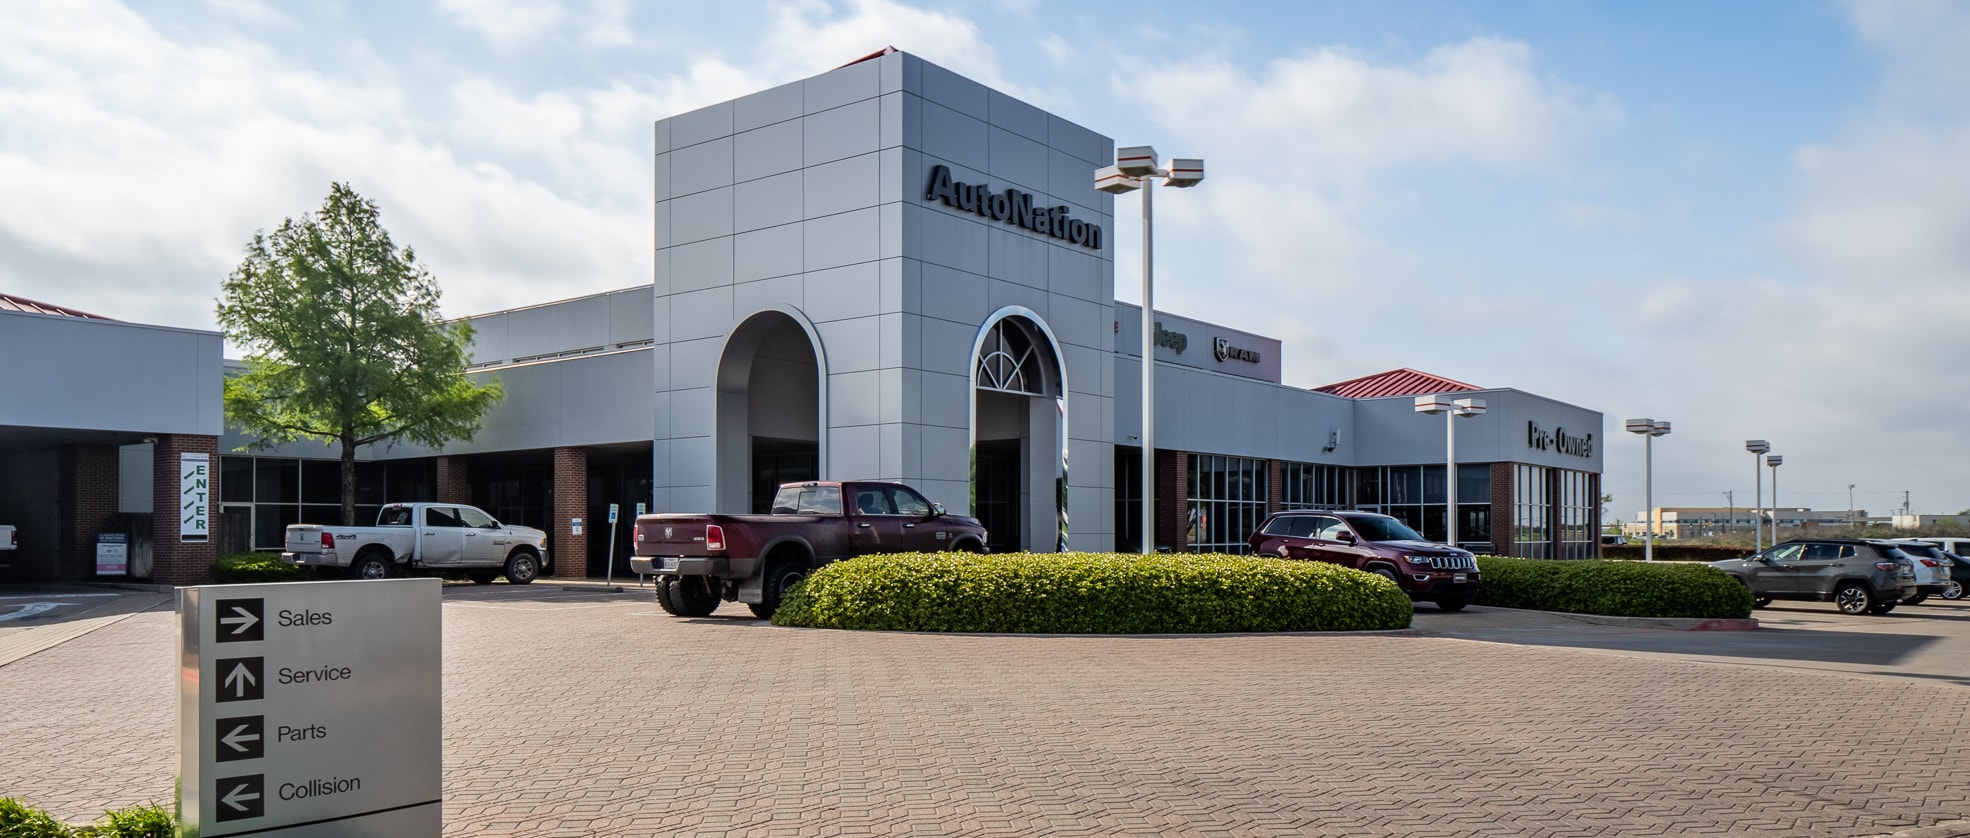 Exterior view of Autonation Chrysler Dodge Jeep Ram North Fort Worth